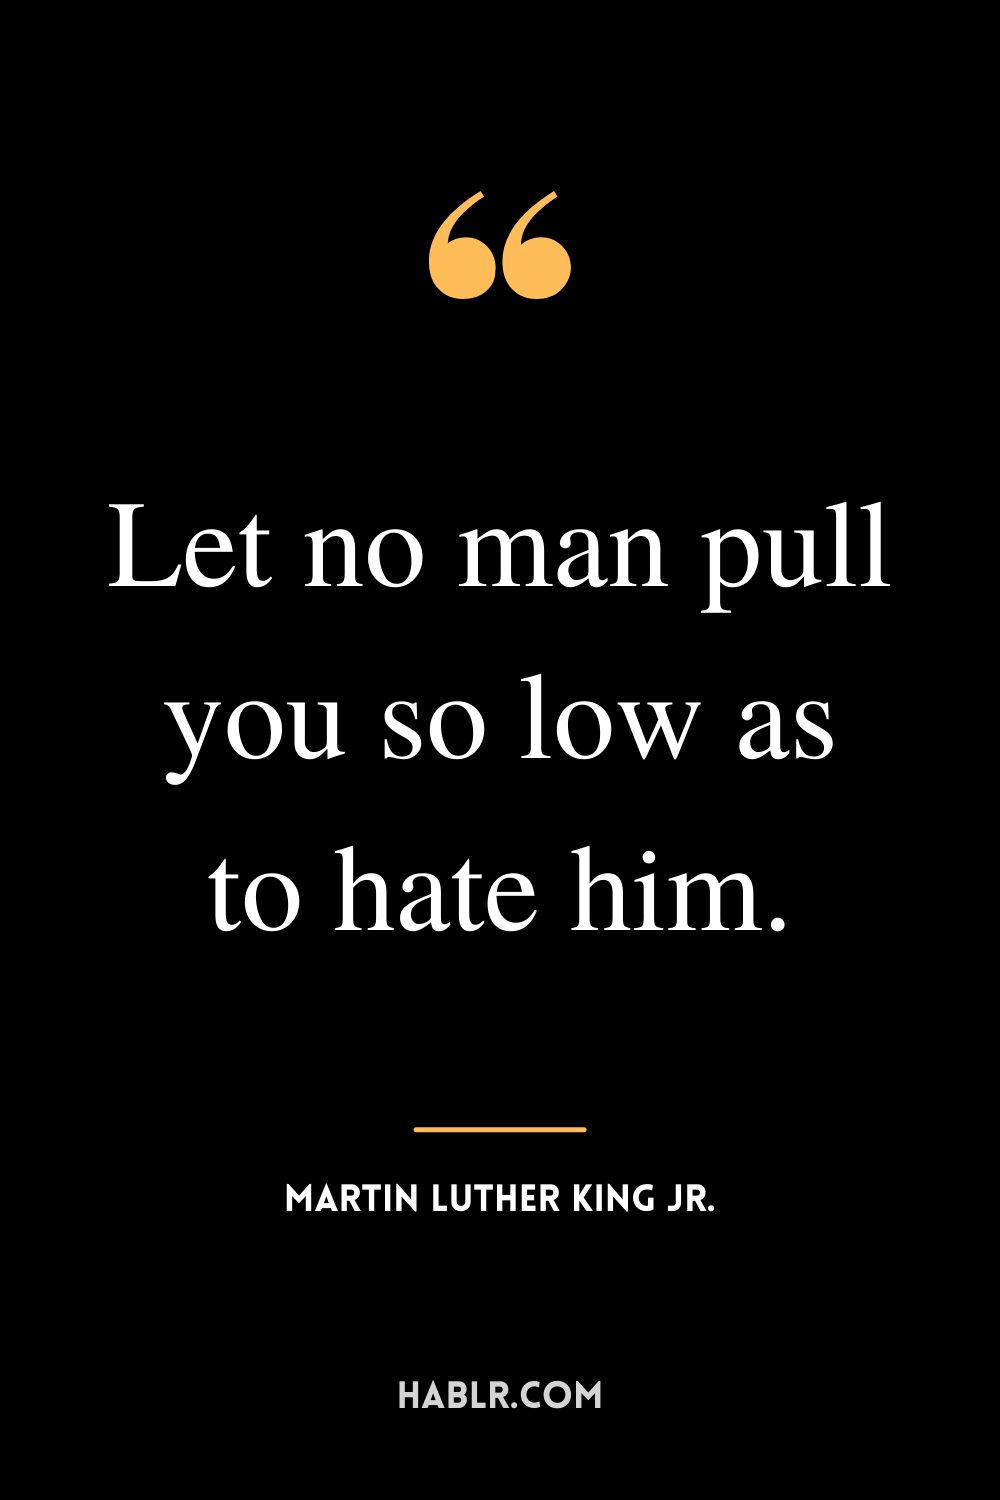 "Let no man pull you so low as to hate him." -Martin Luther King Jr.